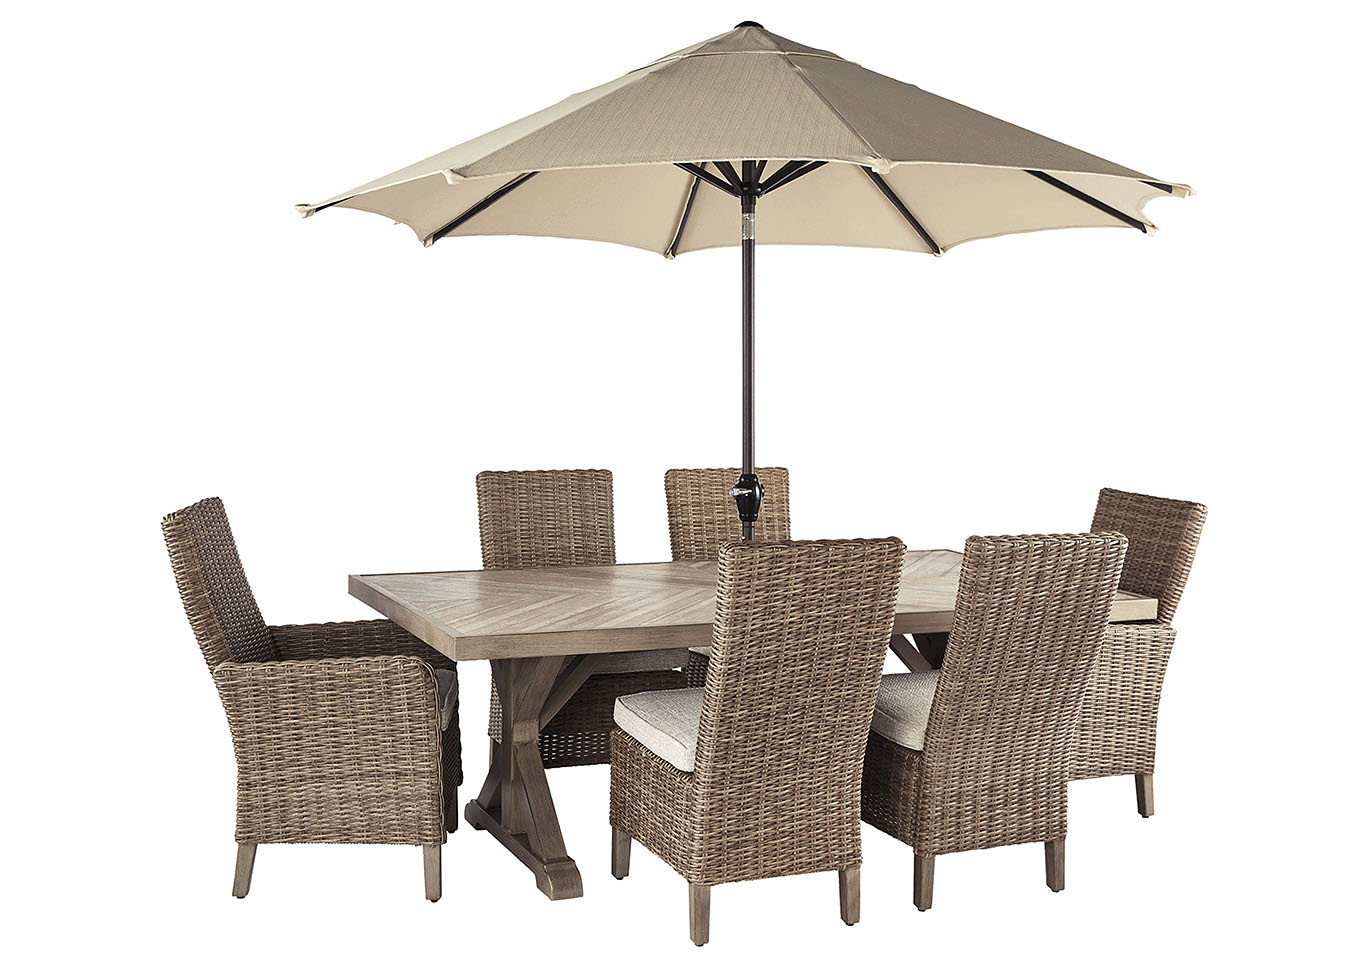 Star Furniture Beachcroft Beige Dining Table W 4 Side Chairs 2